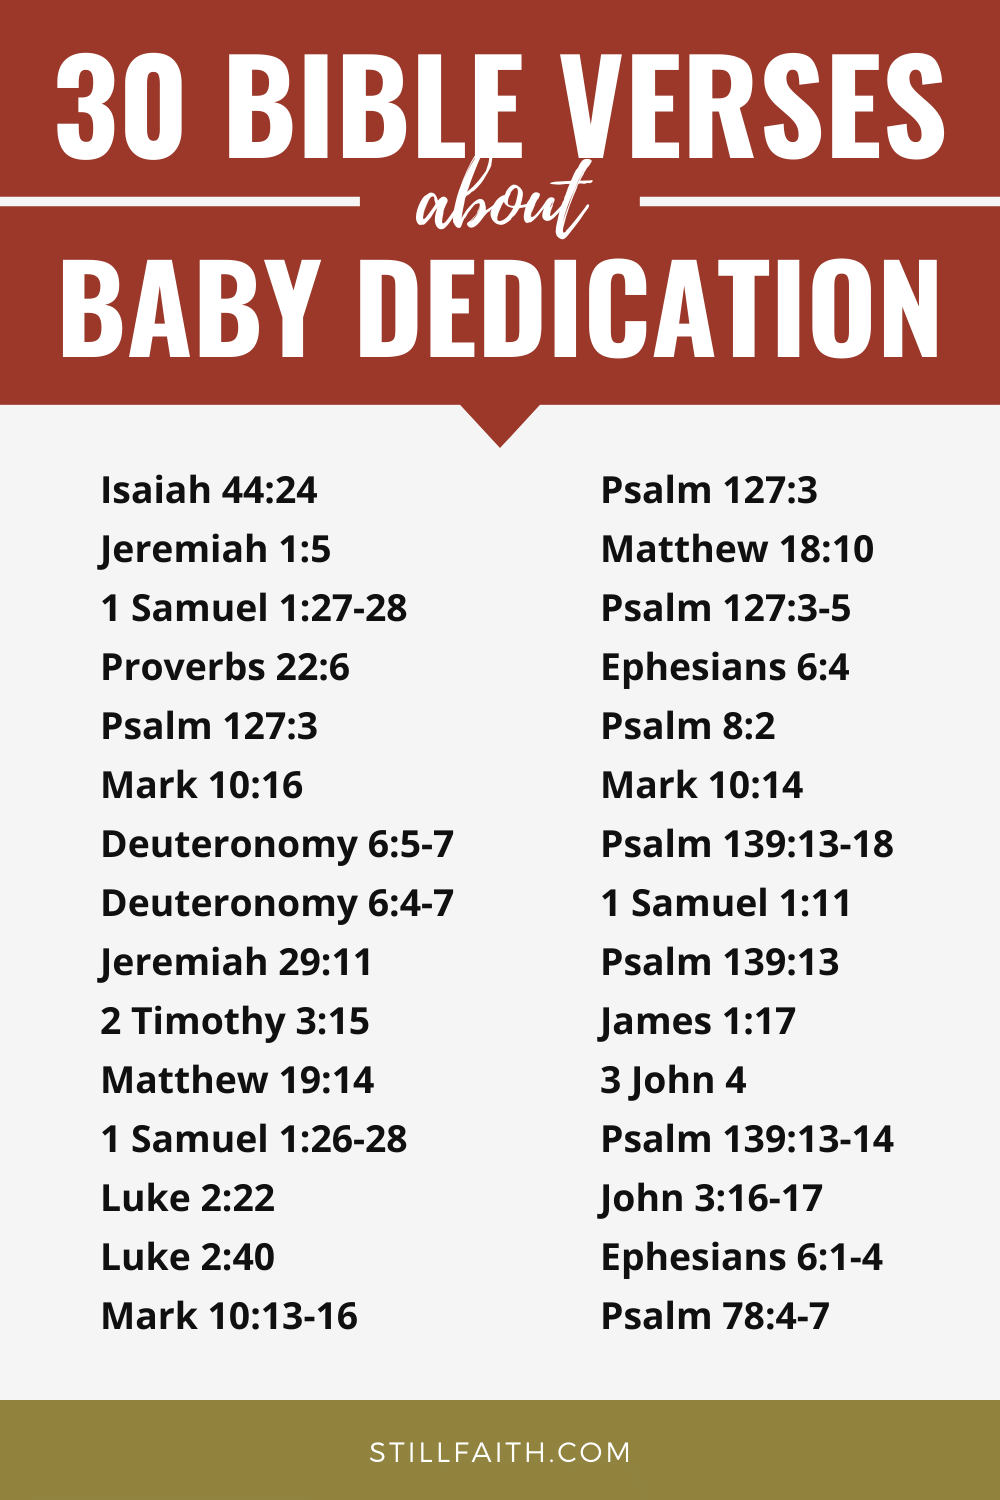 101 Bible Verses about Baby Dedication